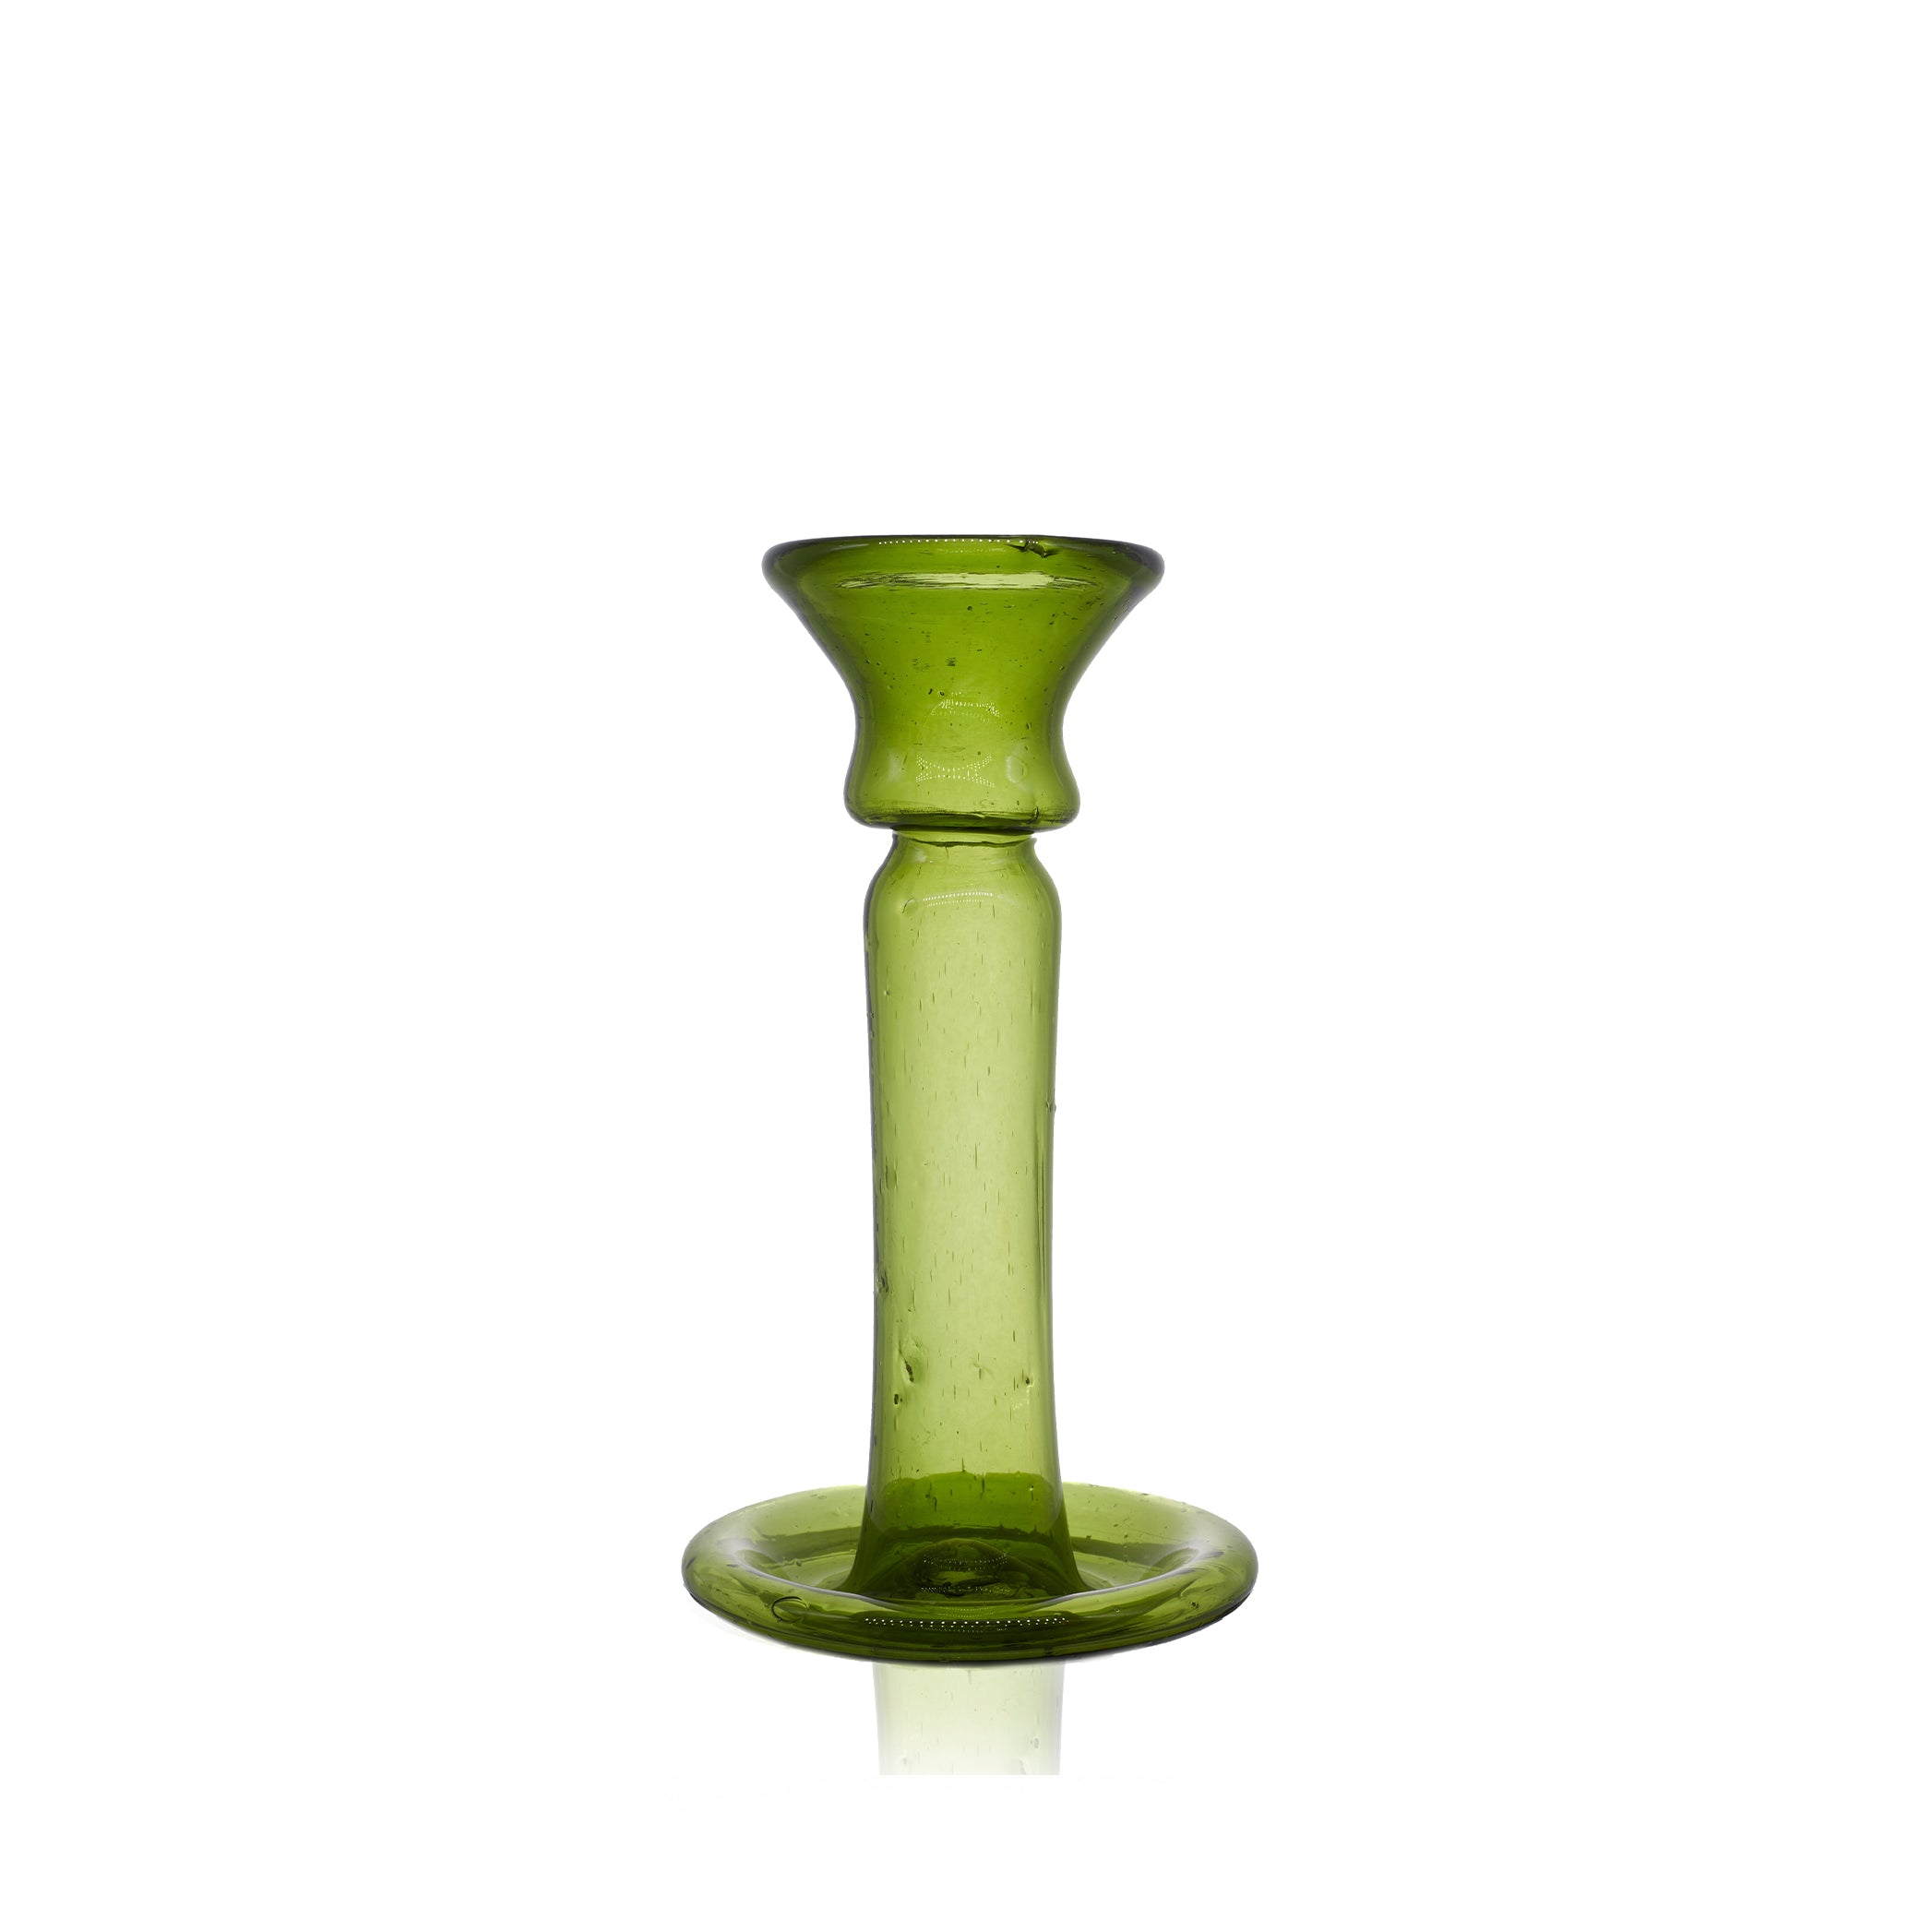 Handblown Large Glass Candlestick in Olive Green, 20cm